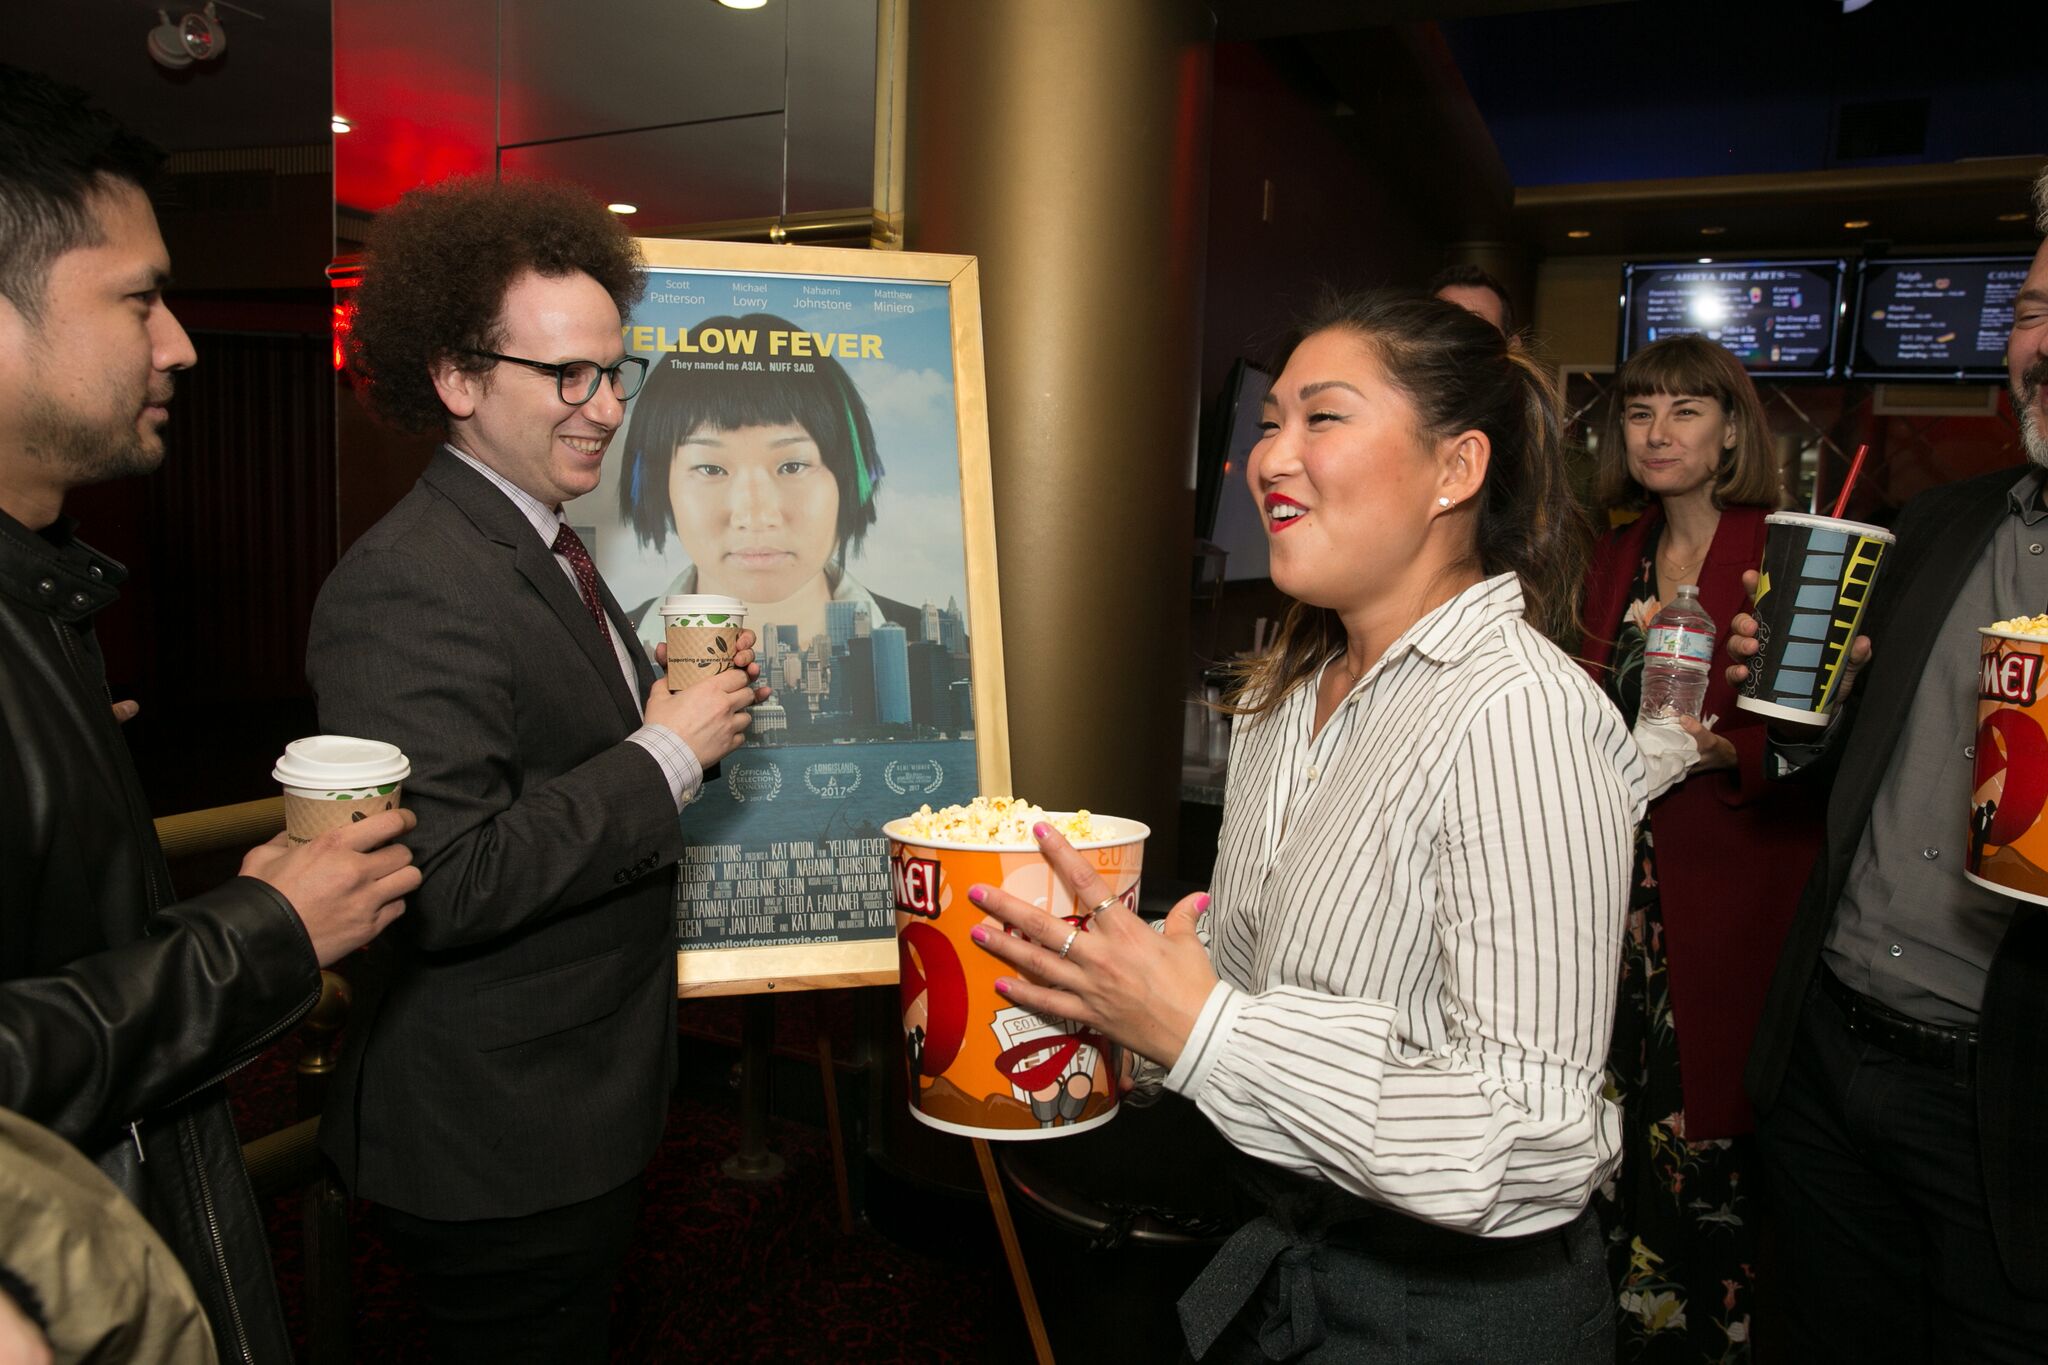 Glee reunion!!  Josh Sussman (L) and Jenna Ushkowitz (R) share a laugh at the LA Premiere of "Yellow Fever."  Photo credit: Gillian Perry.